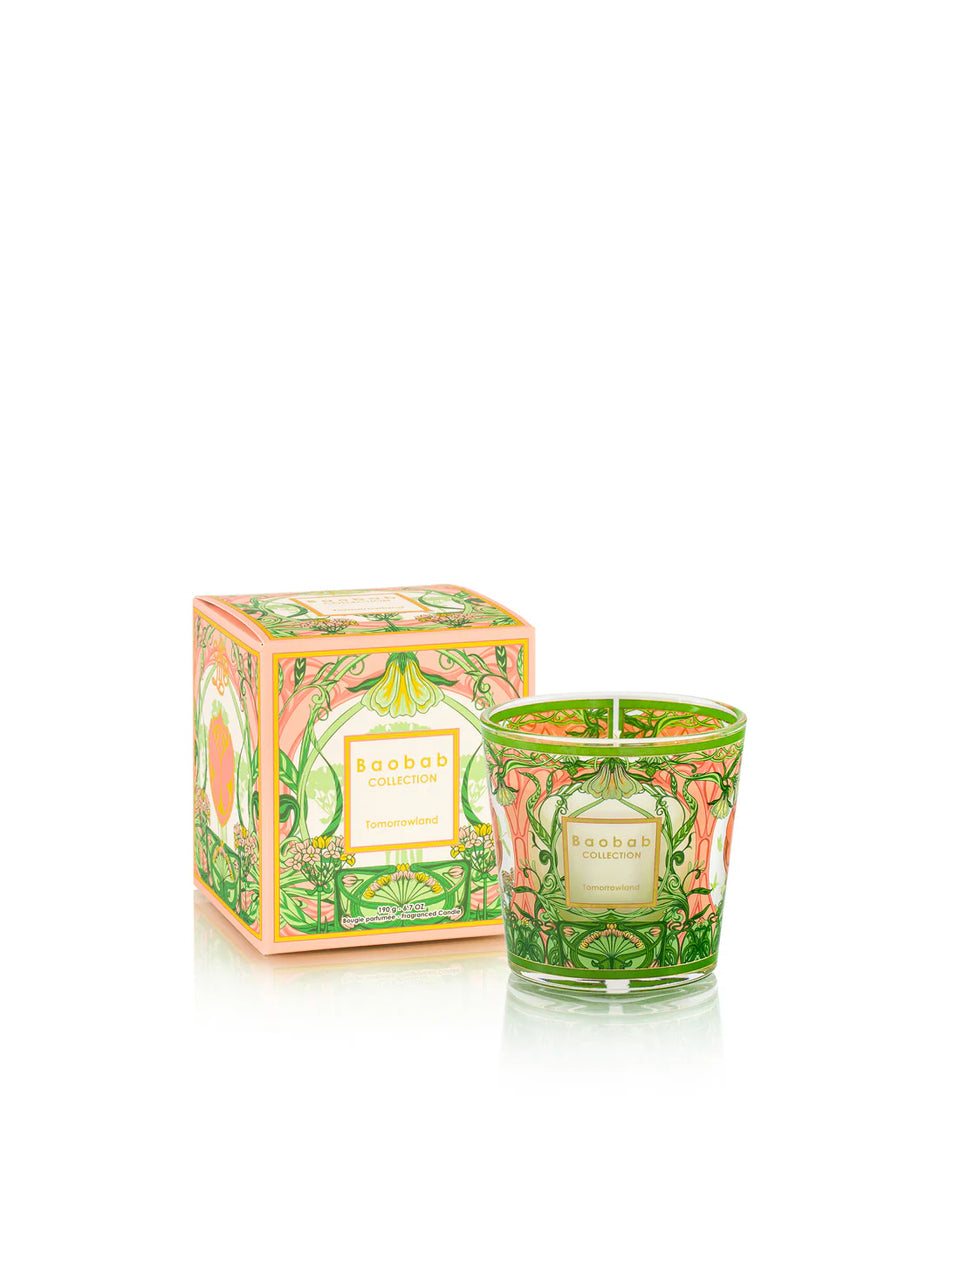 baobab tommorland limited edition candle, candle, baobab, tommorland